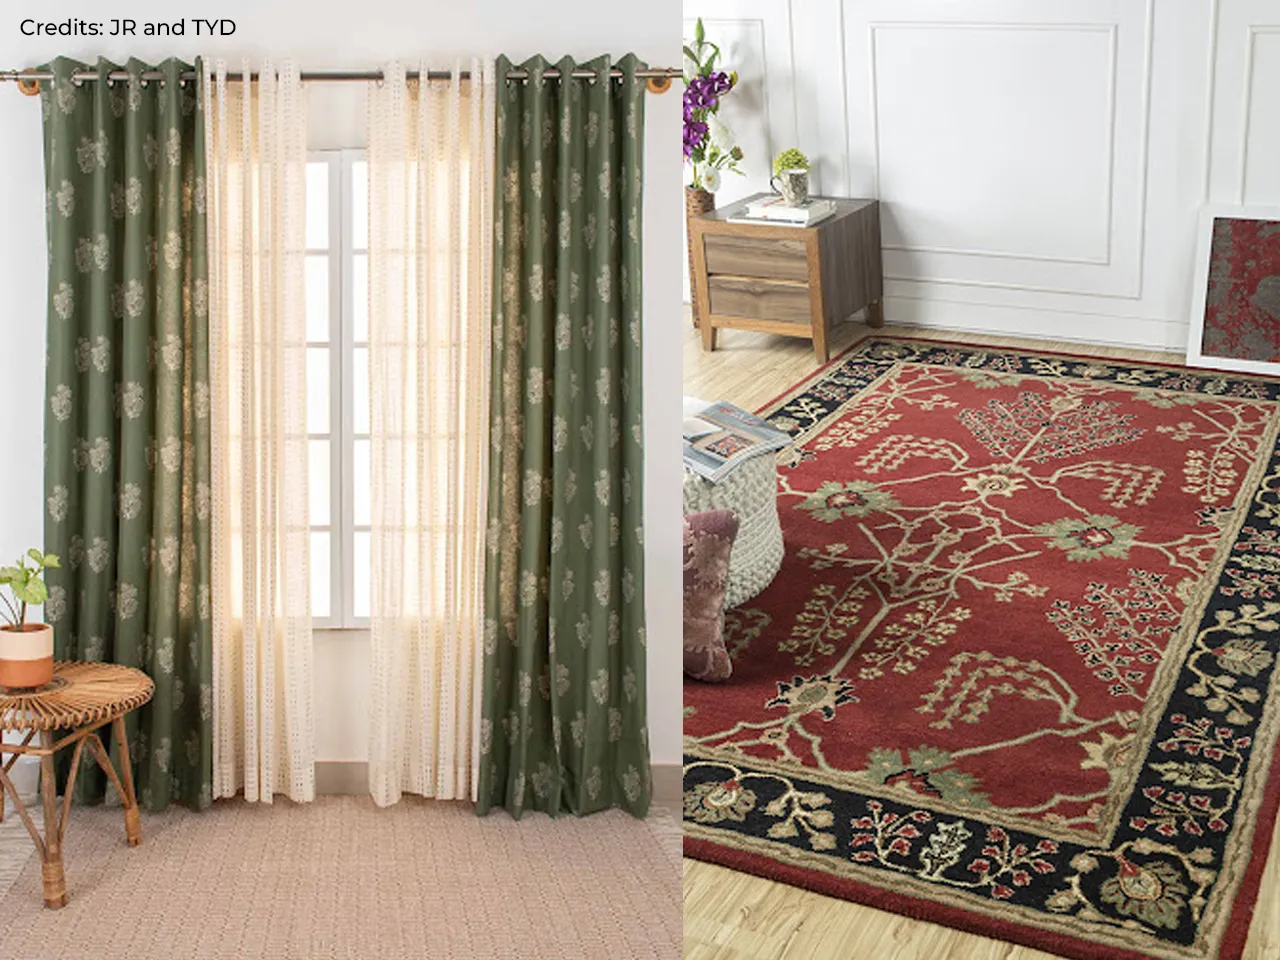 Fi curtains and rugs